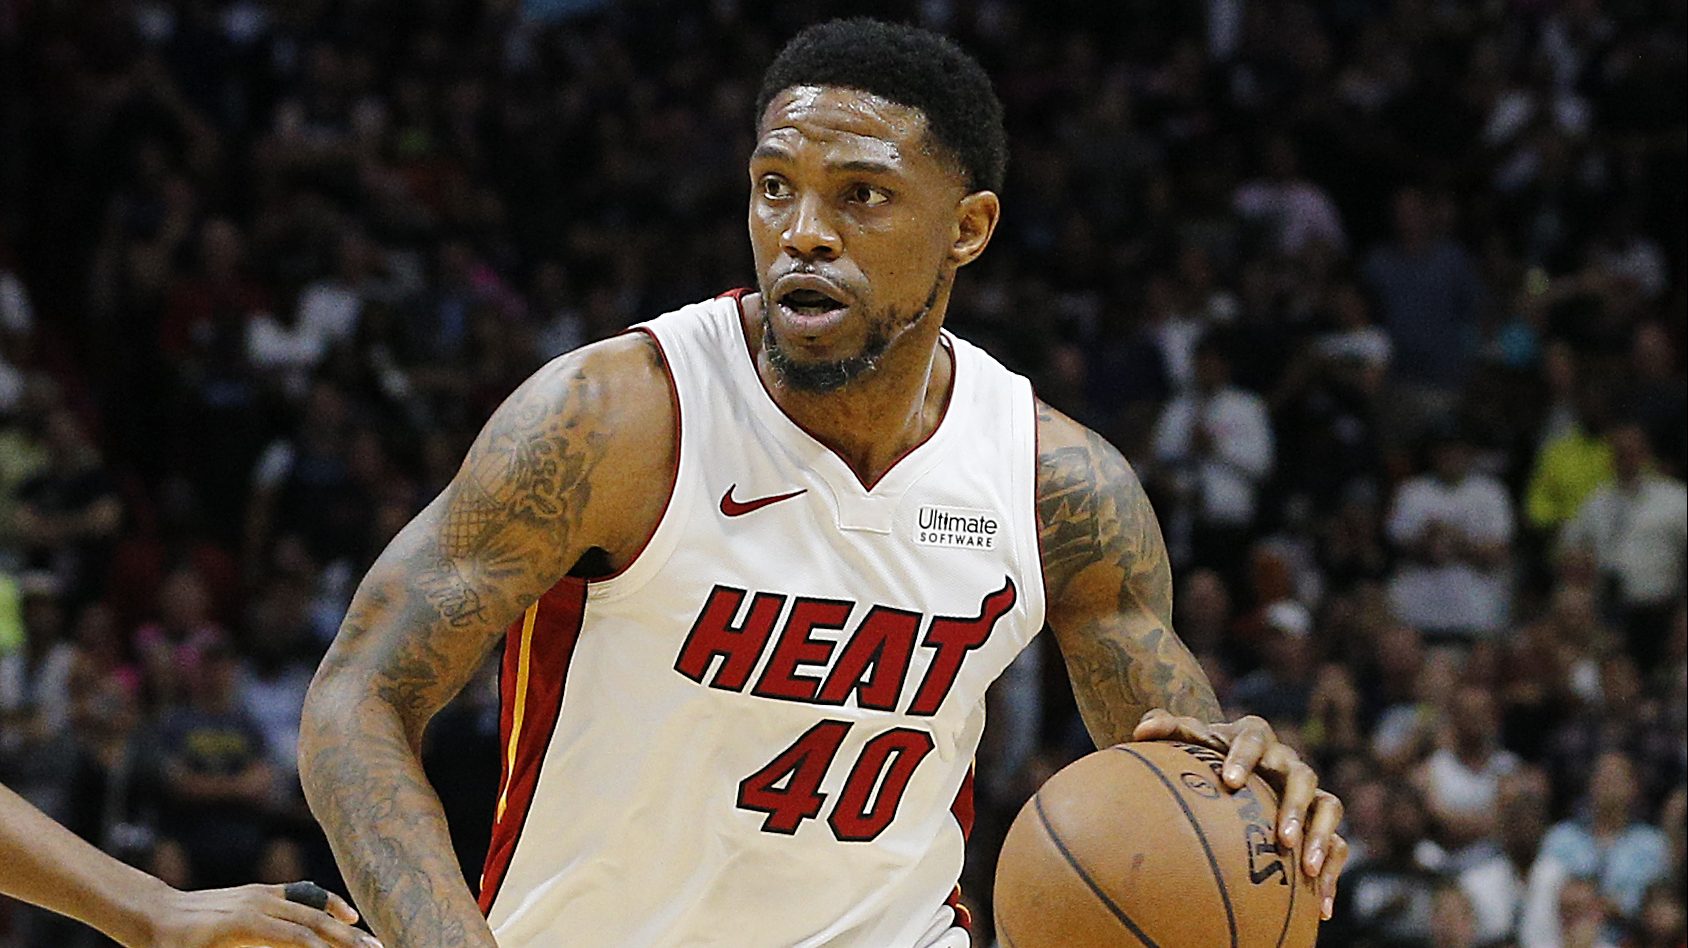 Miami Heat: Udonis Haslem Shows He Still Has A Little Game To Give